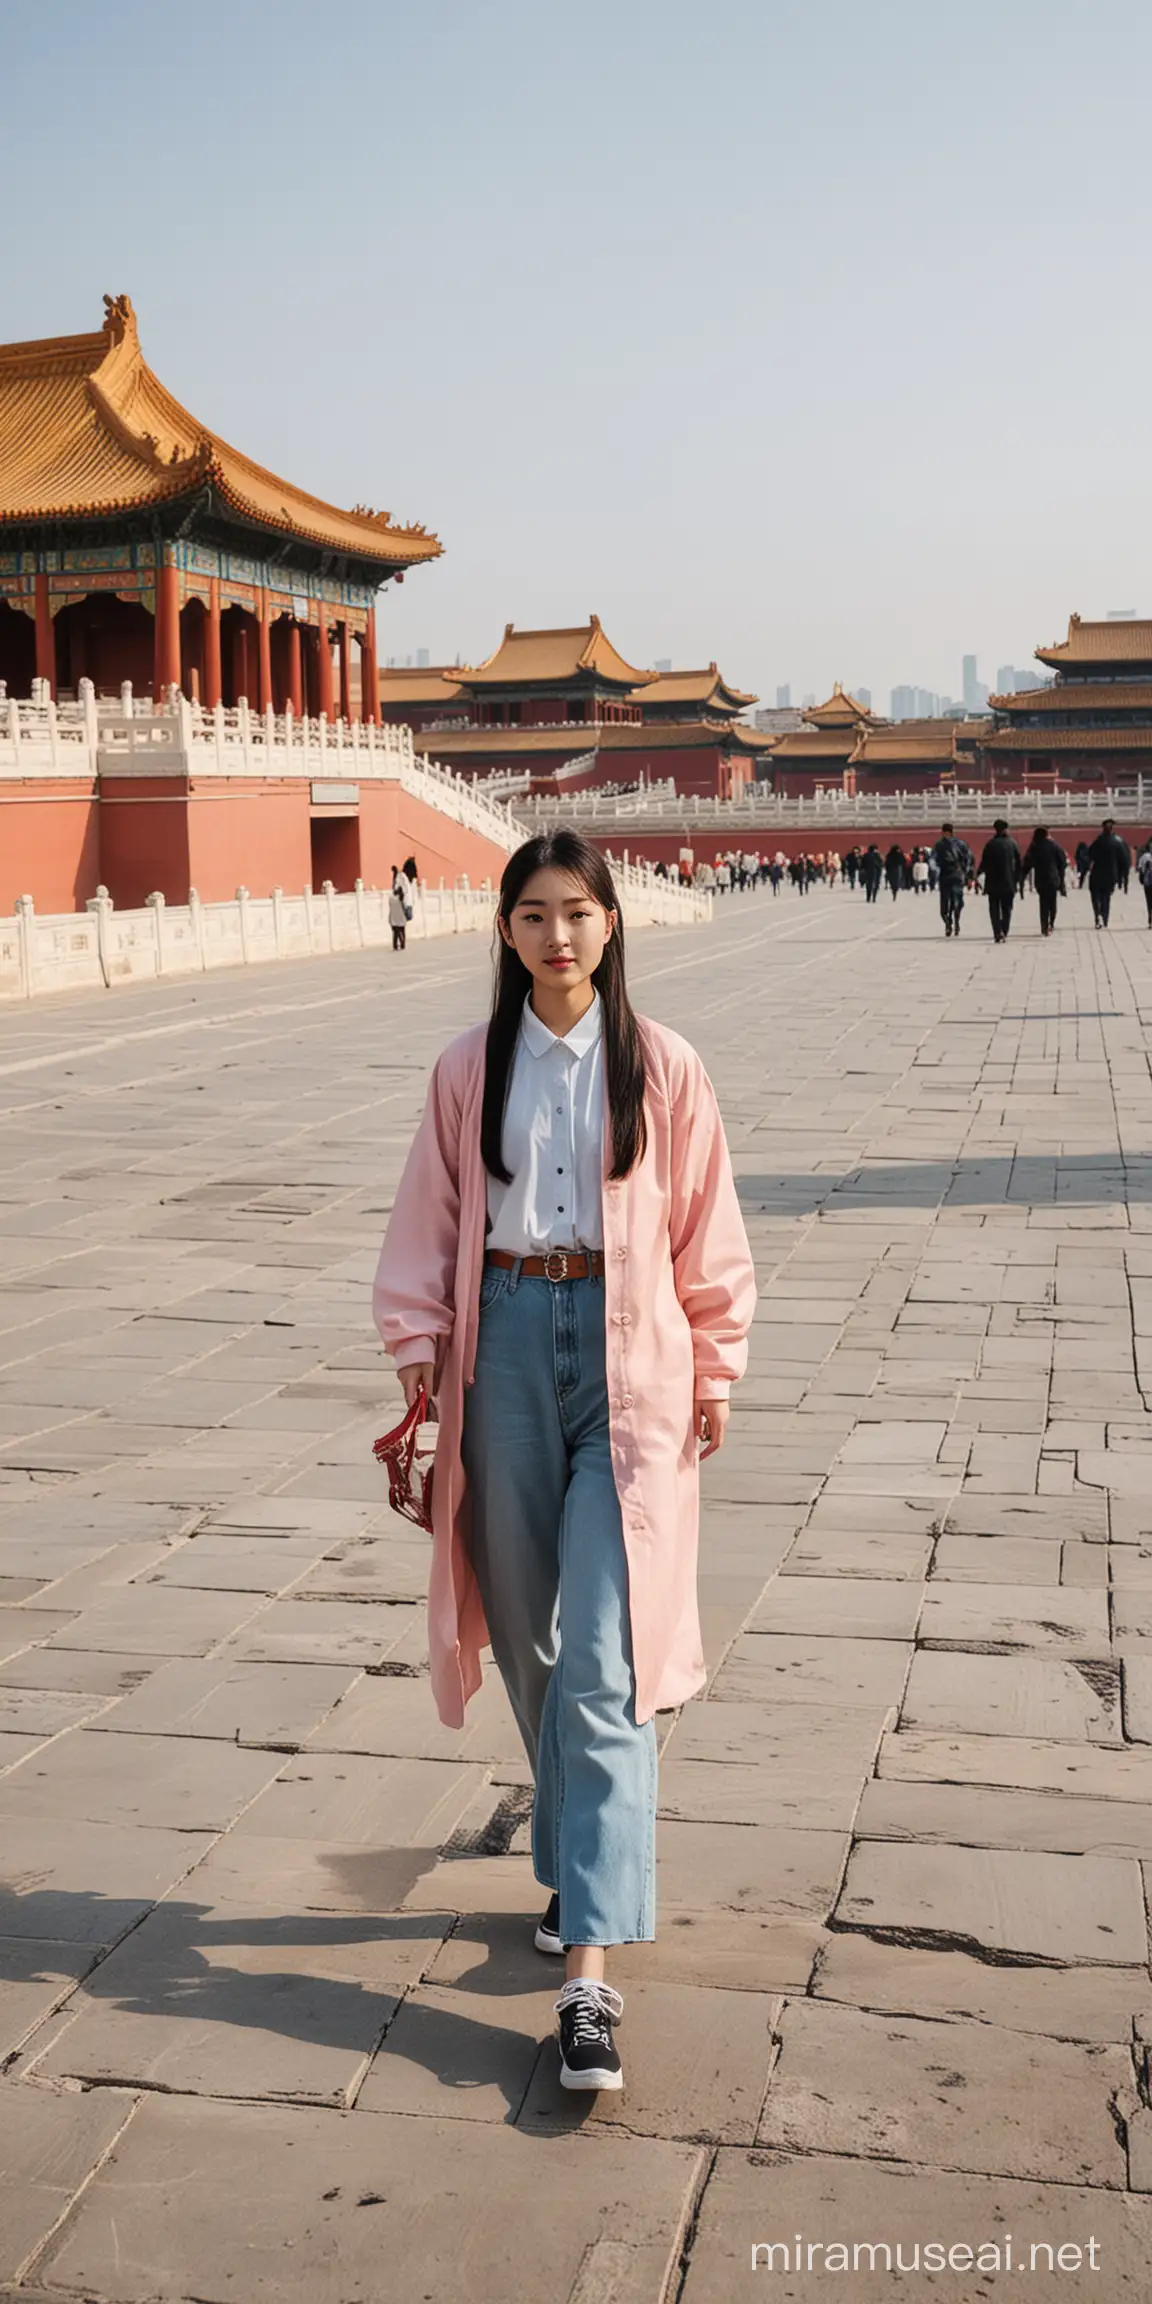 Young Adult Exploring the Historic Forbidden City